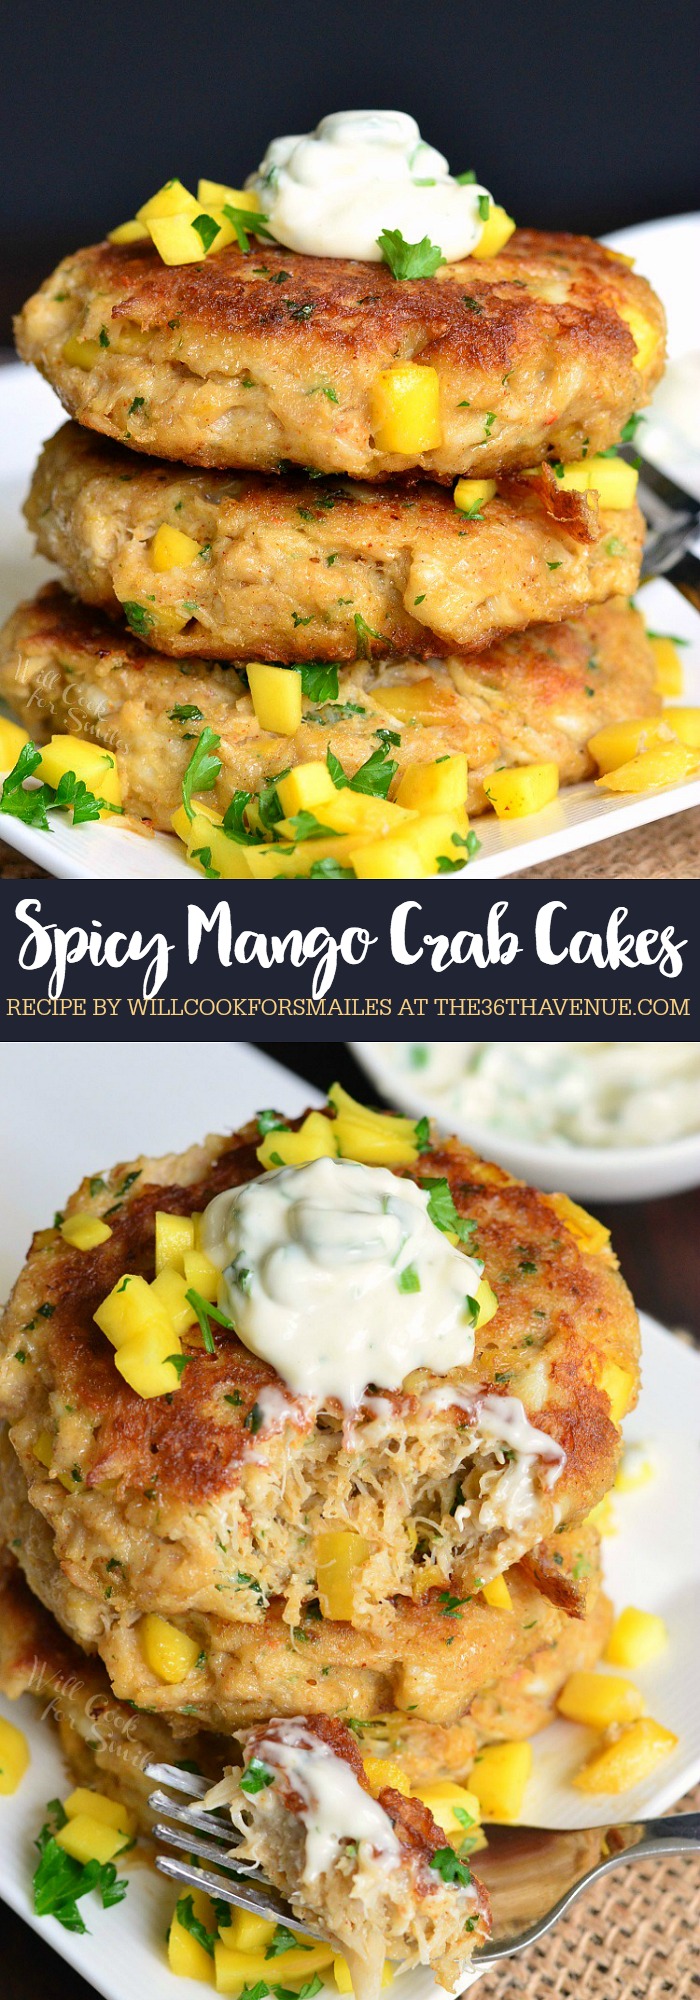 Spicy Mango Crab Cakes Recipe. These delicious crab cakes are made with fresh crab, sweetened with fresh mango, and served with sweet and spicy creamy sauce.